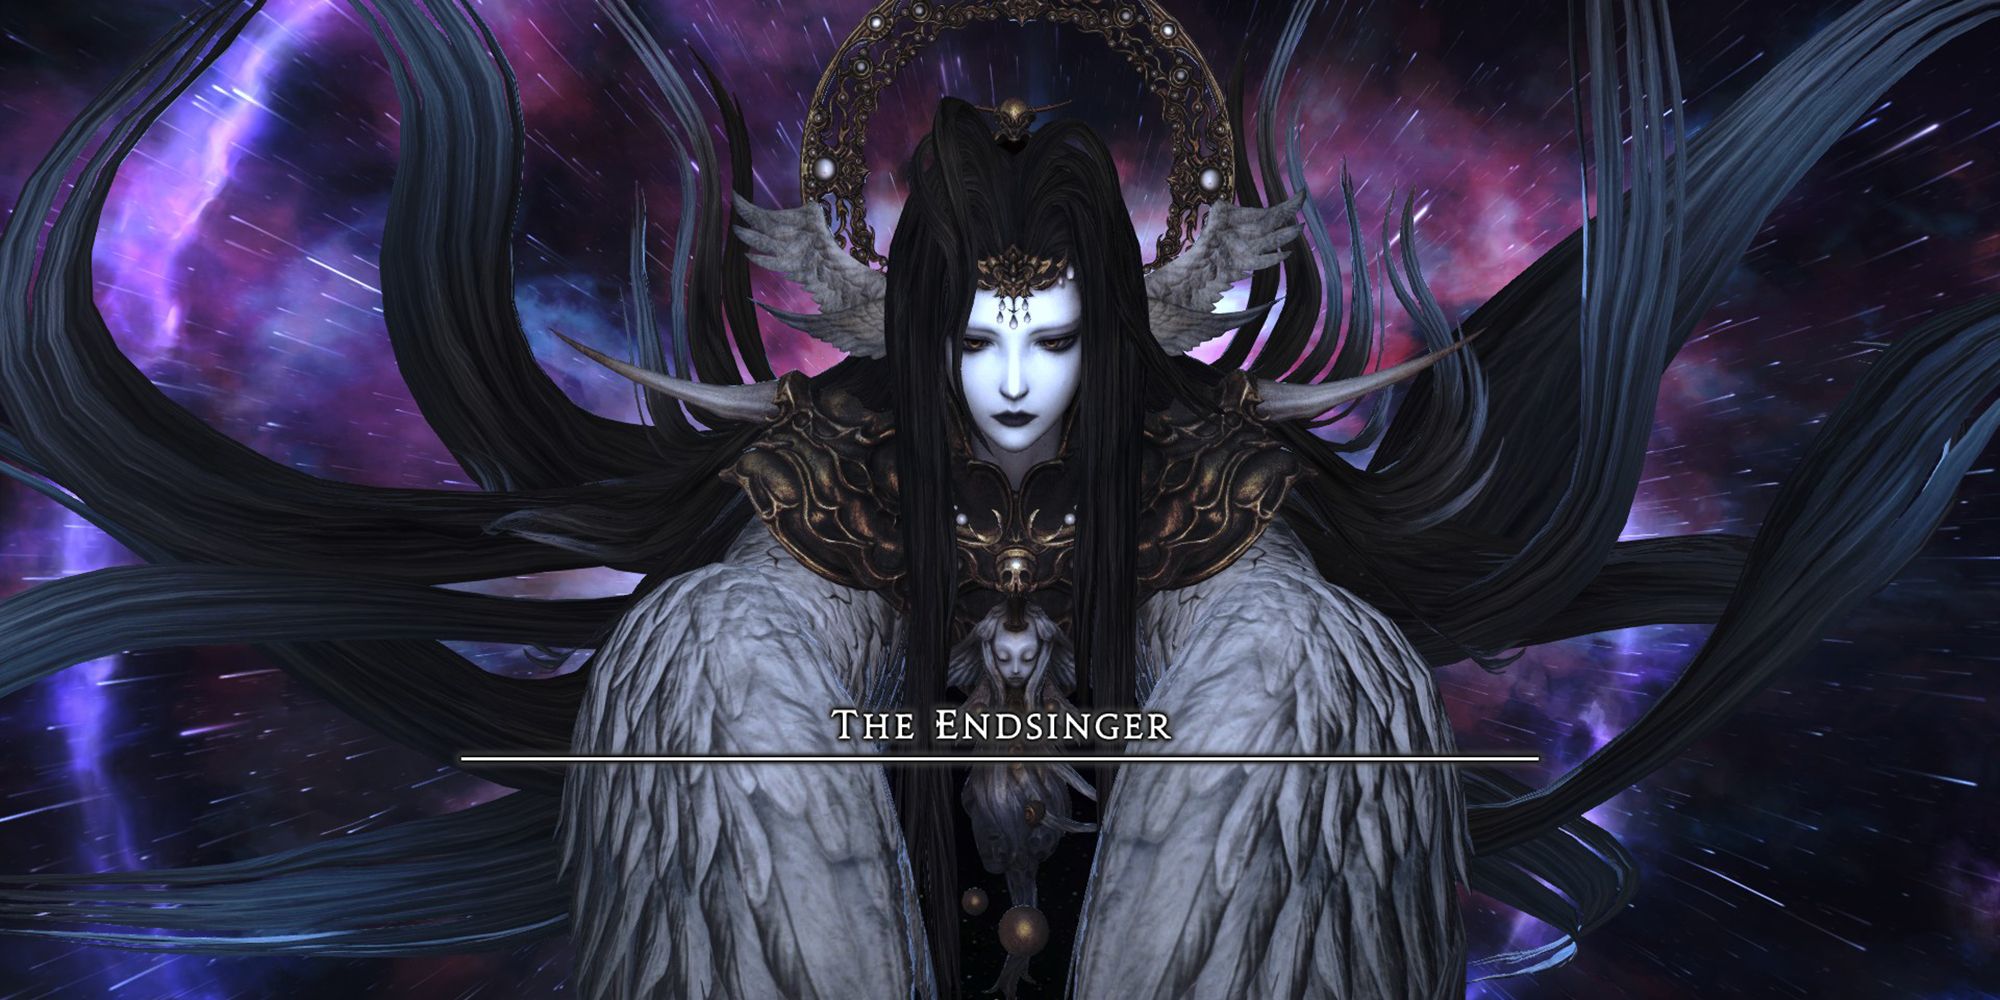 the endsinger, boss of the final day trial